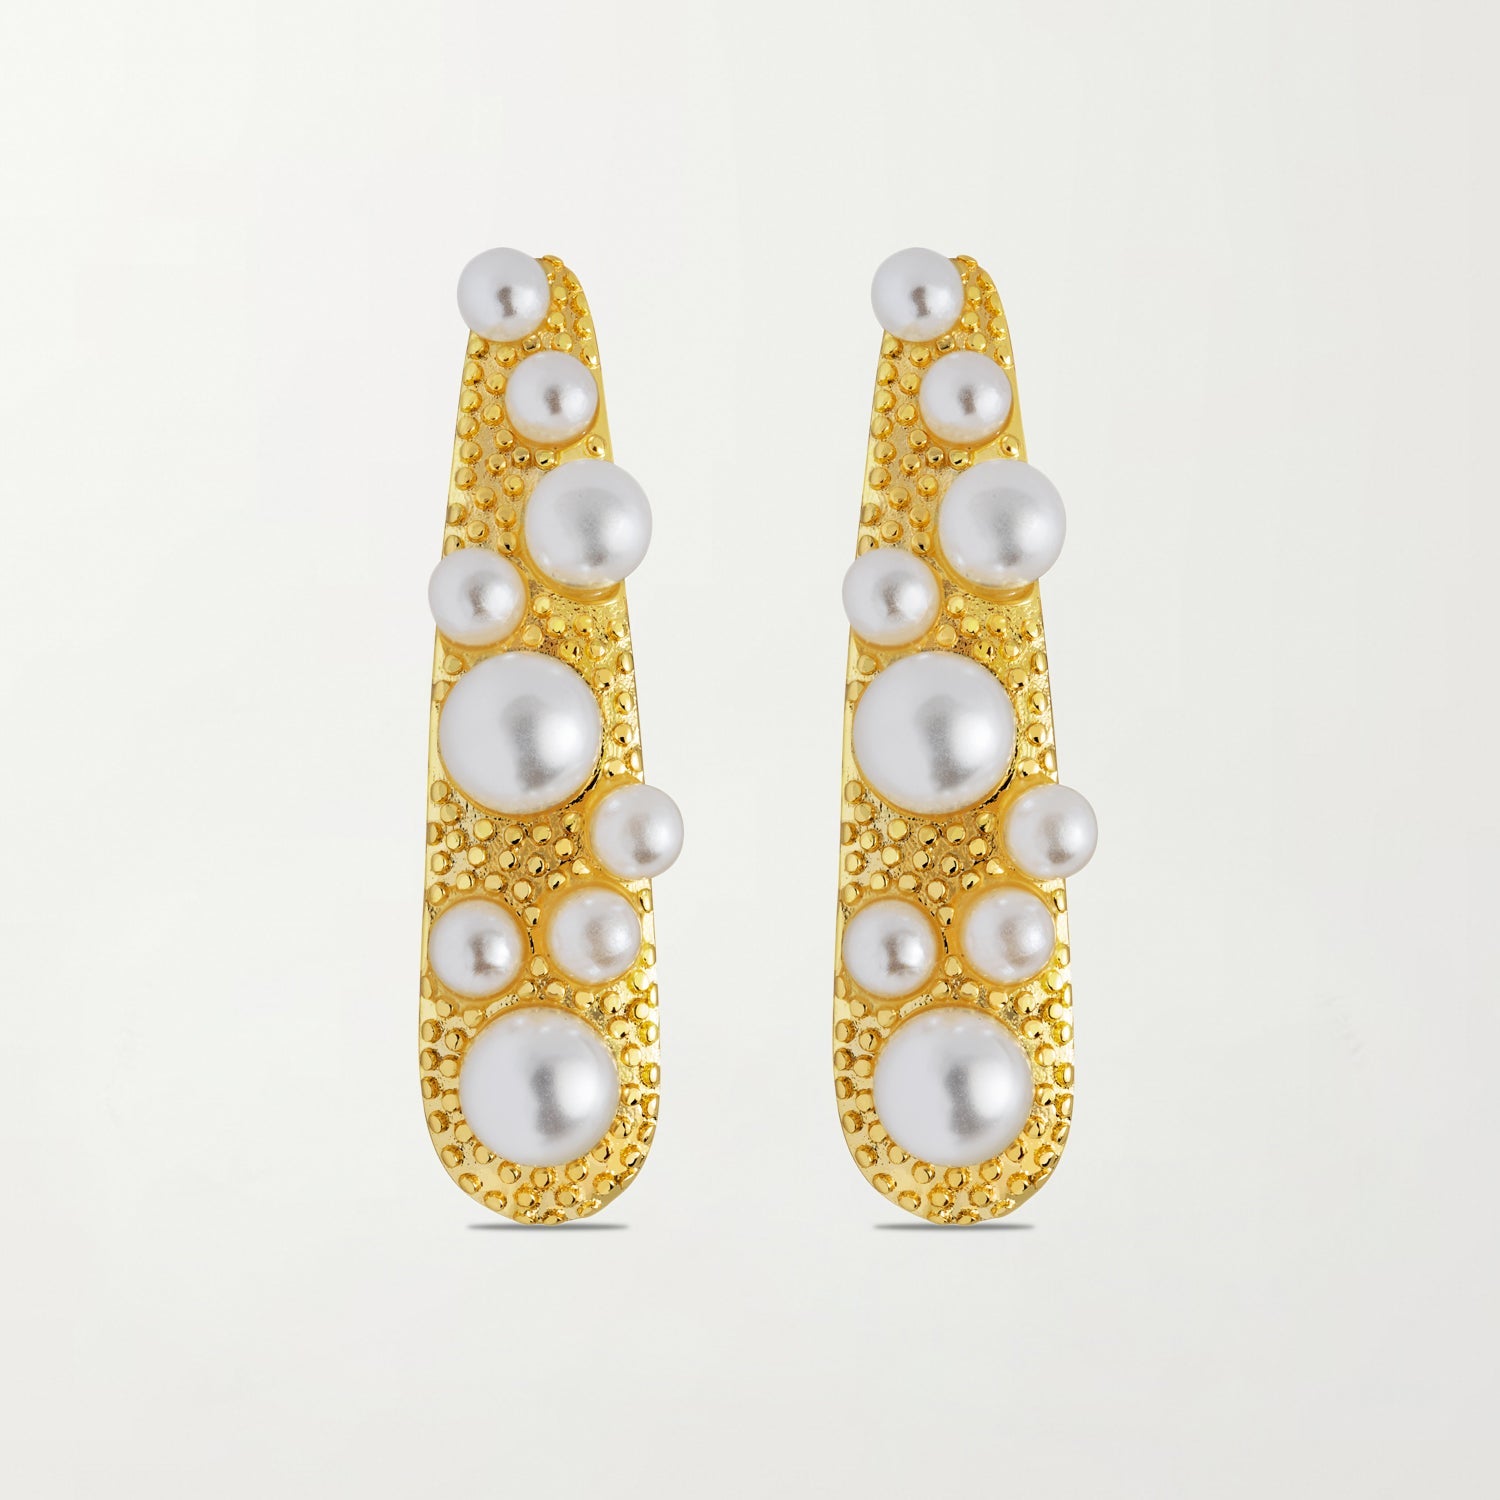 Picture of The Cava Earrings